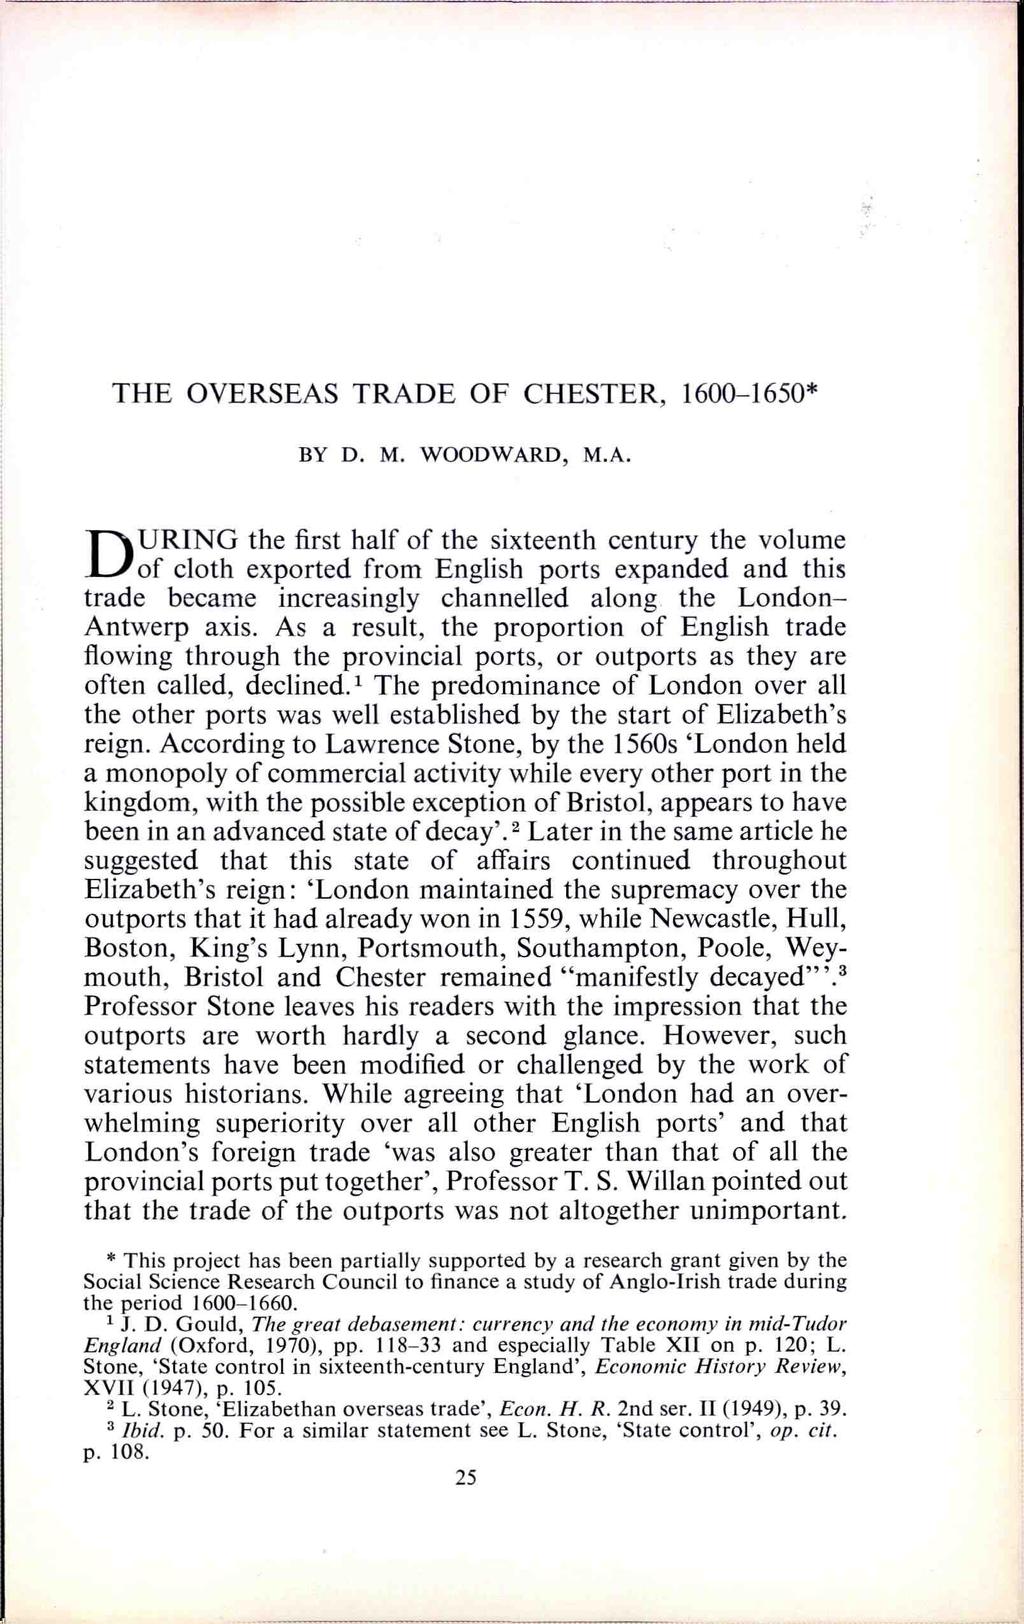 THE OVERSEAS TRADE OF CHESTER, 1600-1650* BY D. M. WOODWARD, M.A. DURING the first half of the sixteenth century the volume of cloth exported from English ports expanded and this trade became increasingly channelled along the London- Antwerp axis.